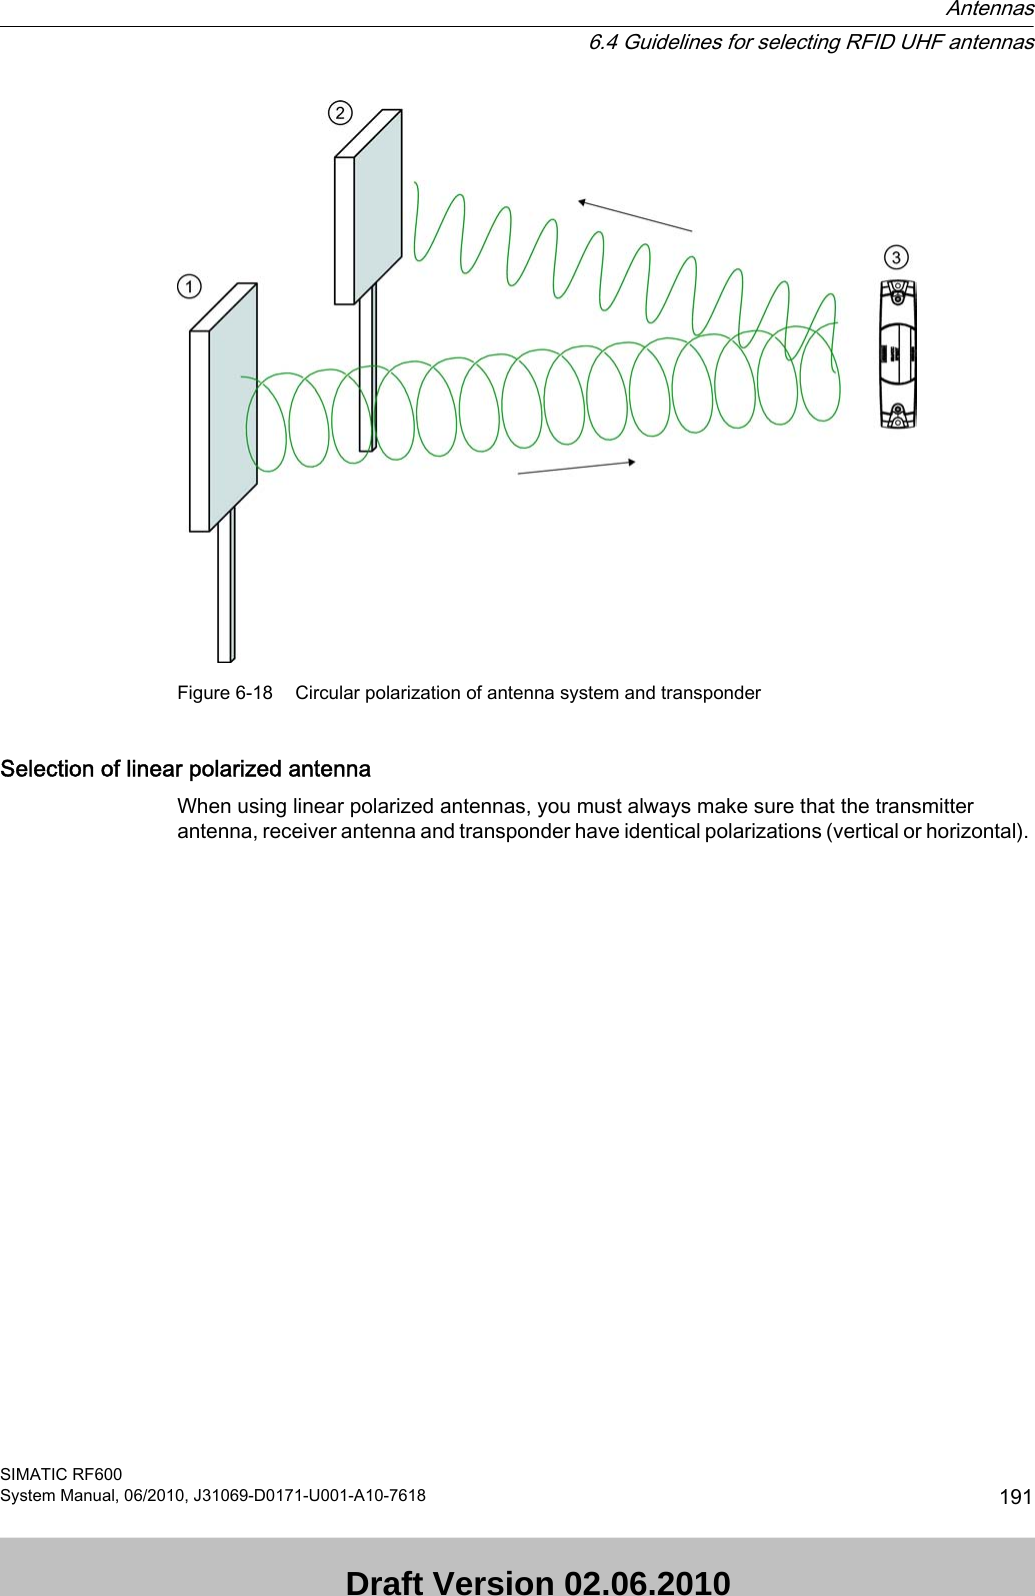 Figure 6-18 Circular polarization of antenna system and transponderSelection of linear polarized antennaWhen using linear polarized antennas, you must always make sure that the transmitter antenna, receiver antenna and transponder have identical polarizations (vertical or horizontal). Antennas6.4 Guidelines for selecting RFID UHF antennasSIMATIC RF600System Manual, 06/2010, J31069-D0171-U001-A10-7618 191 Draft Version 02.06.2010 